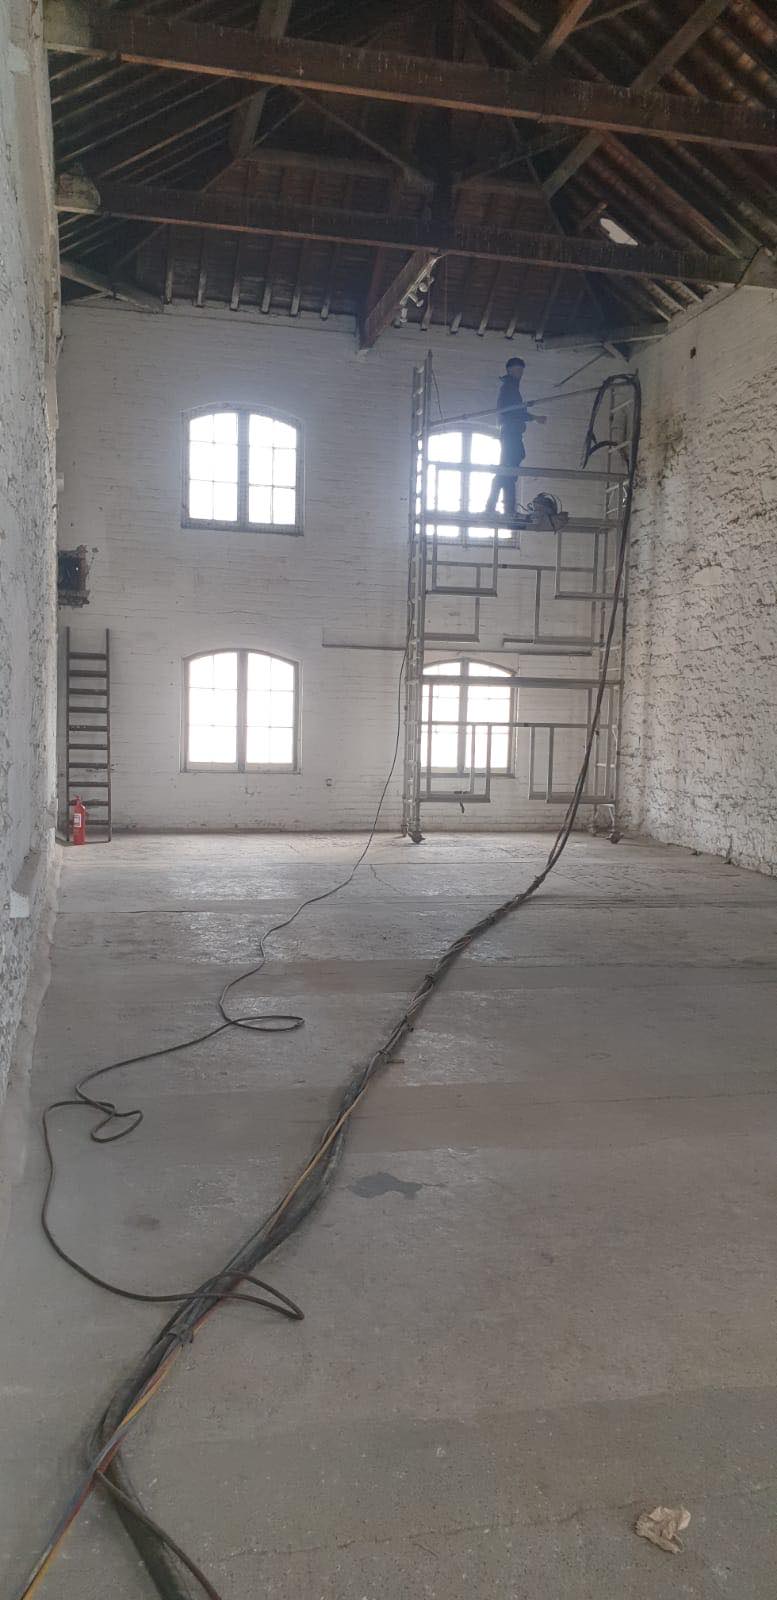 Sandblasting to expose historical walls and beams at Topsham Brewery and Taproom in Devon